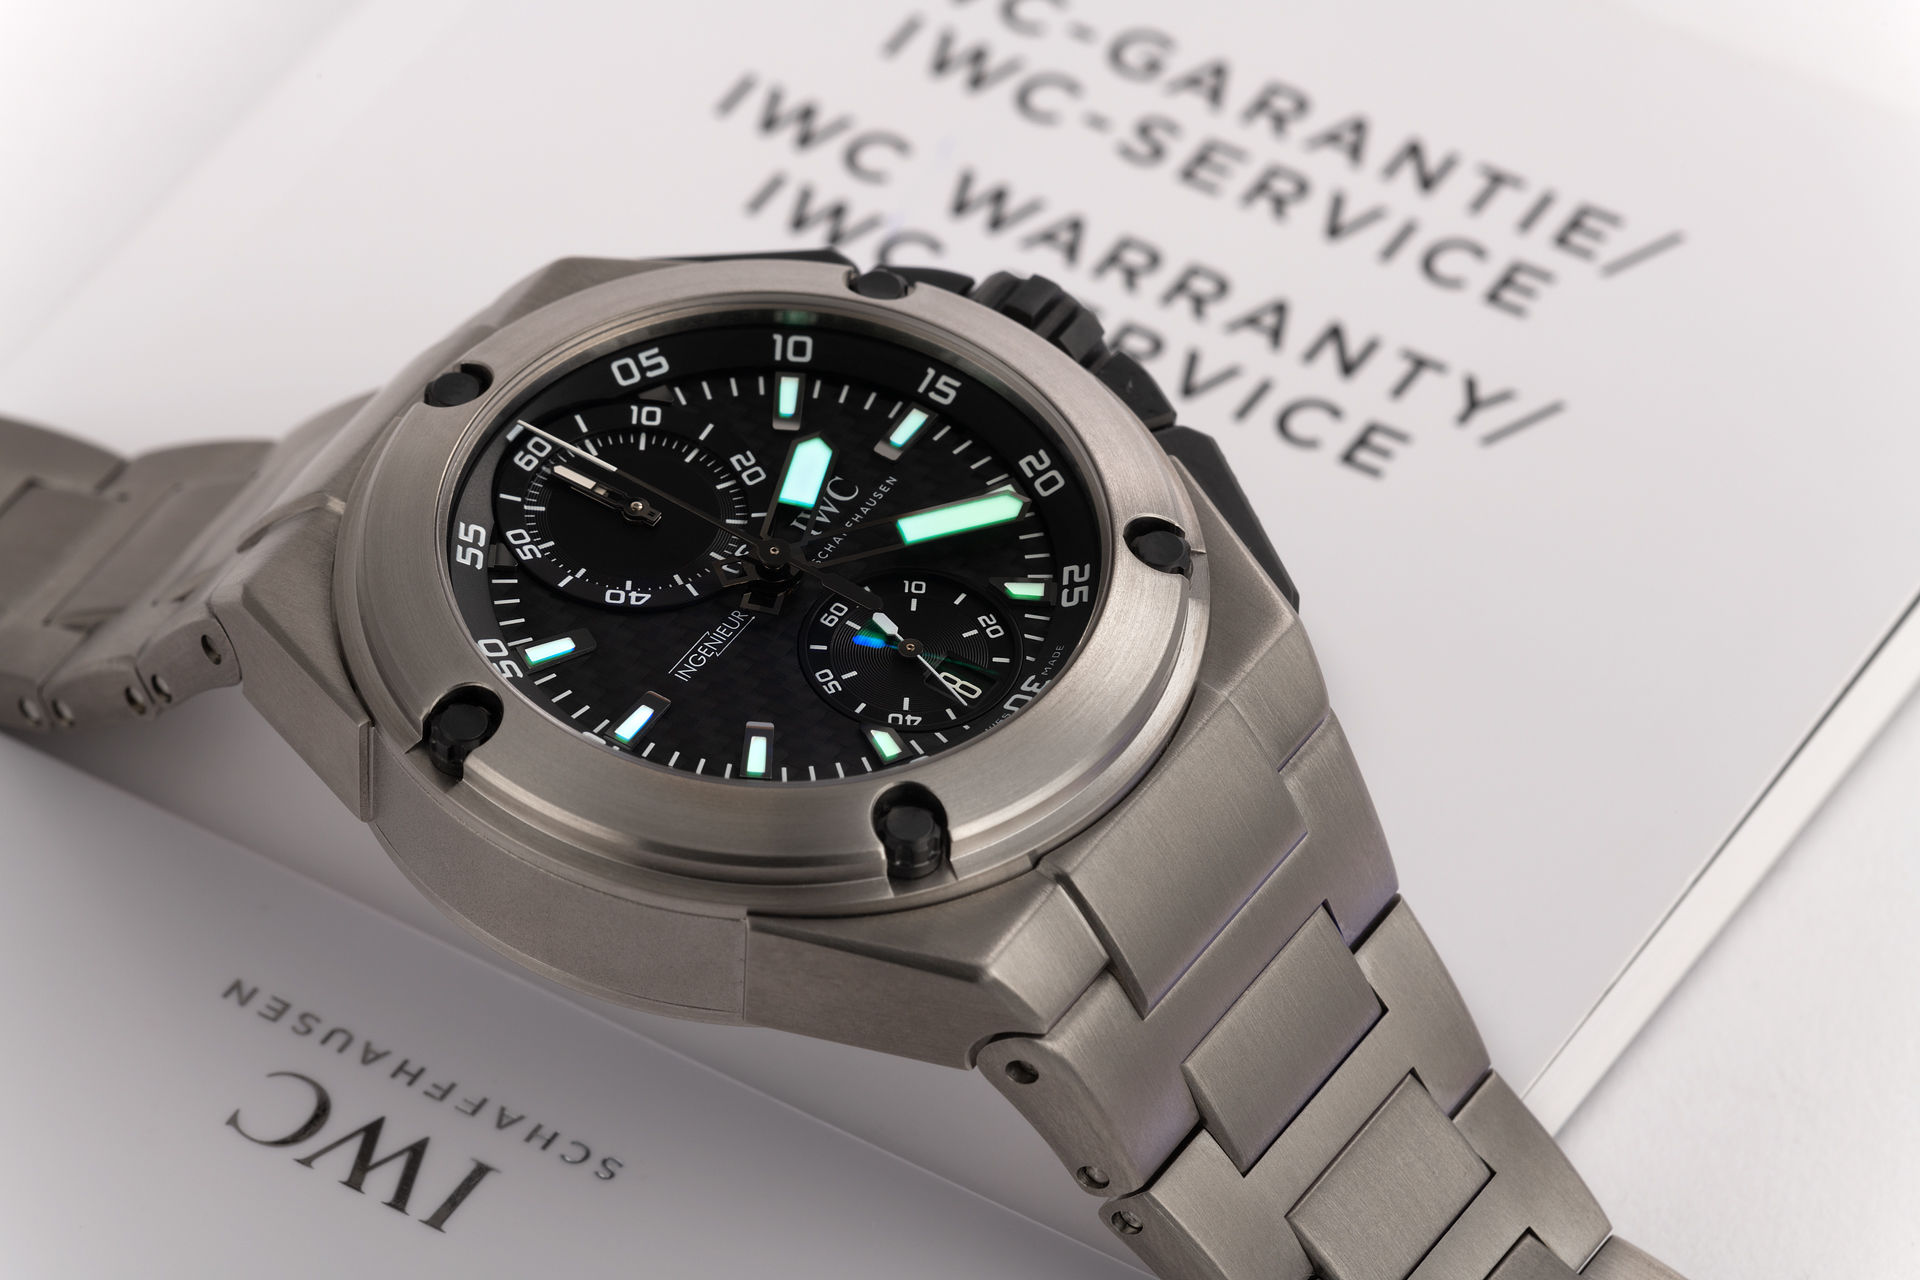 ref IW379602 | Limited Edition 'One of 250' | IWC Ingenieur